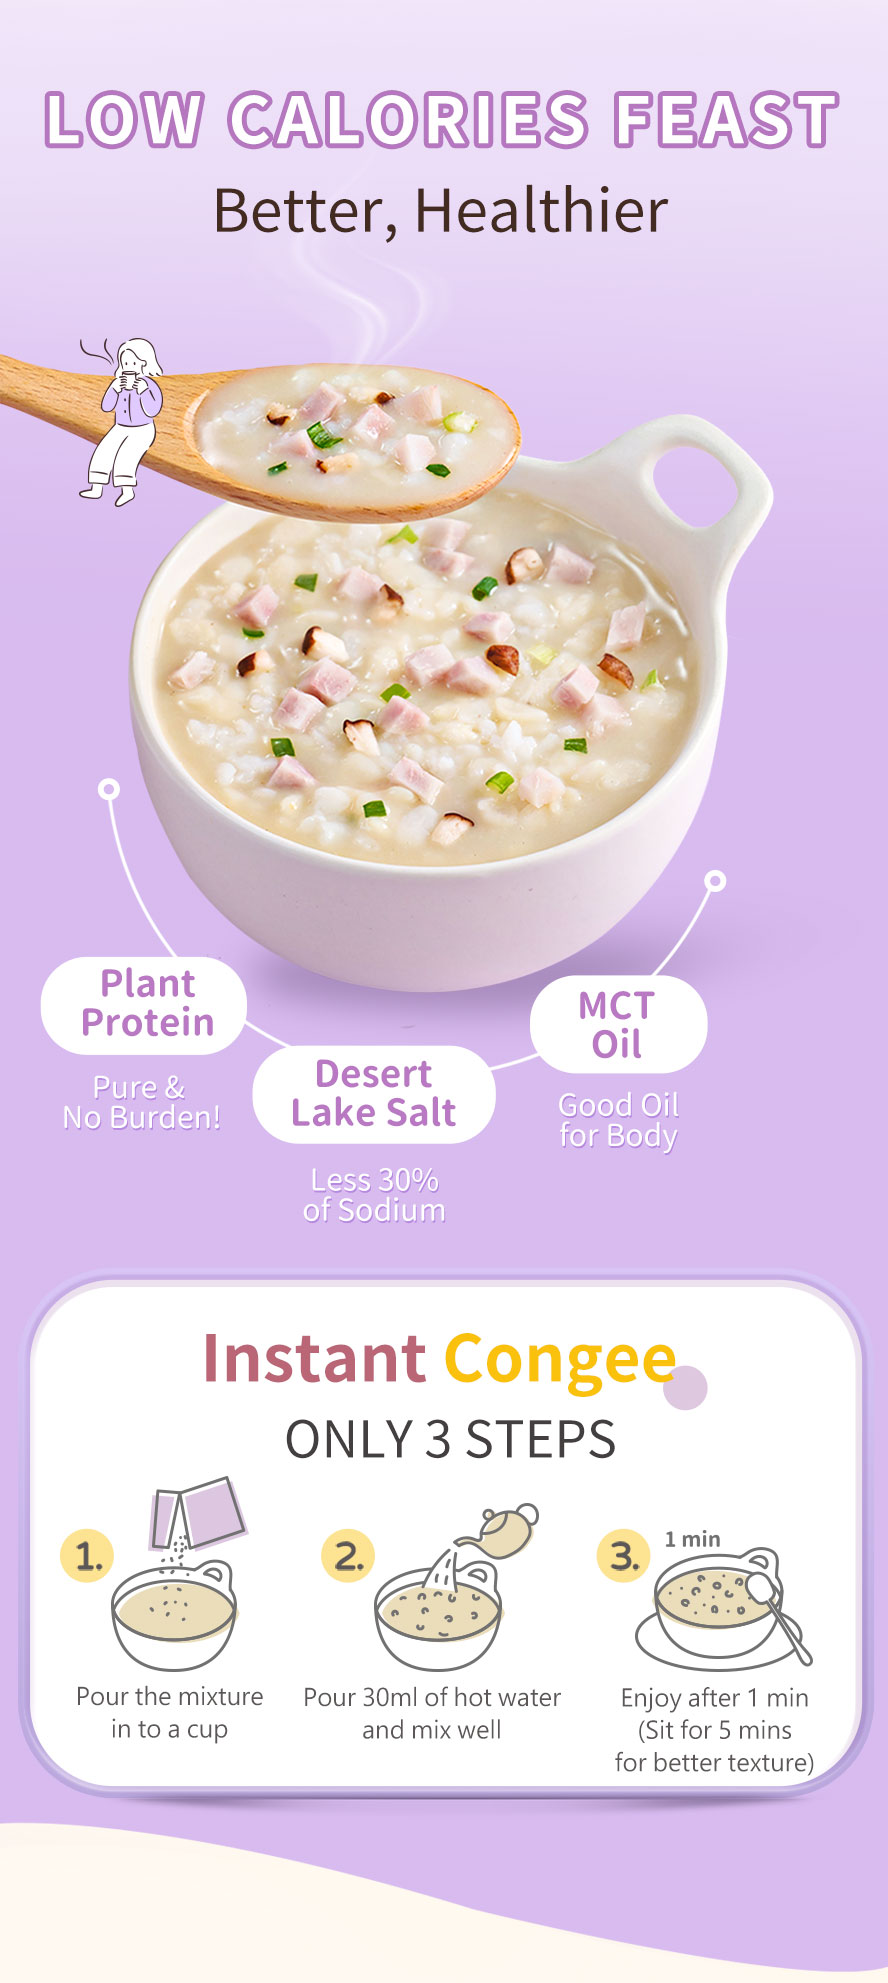 SiimHeart Instant Mushroom & Taro Congee contains plant protein and MCT oil with less sodium intake